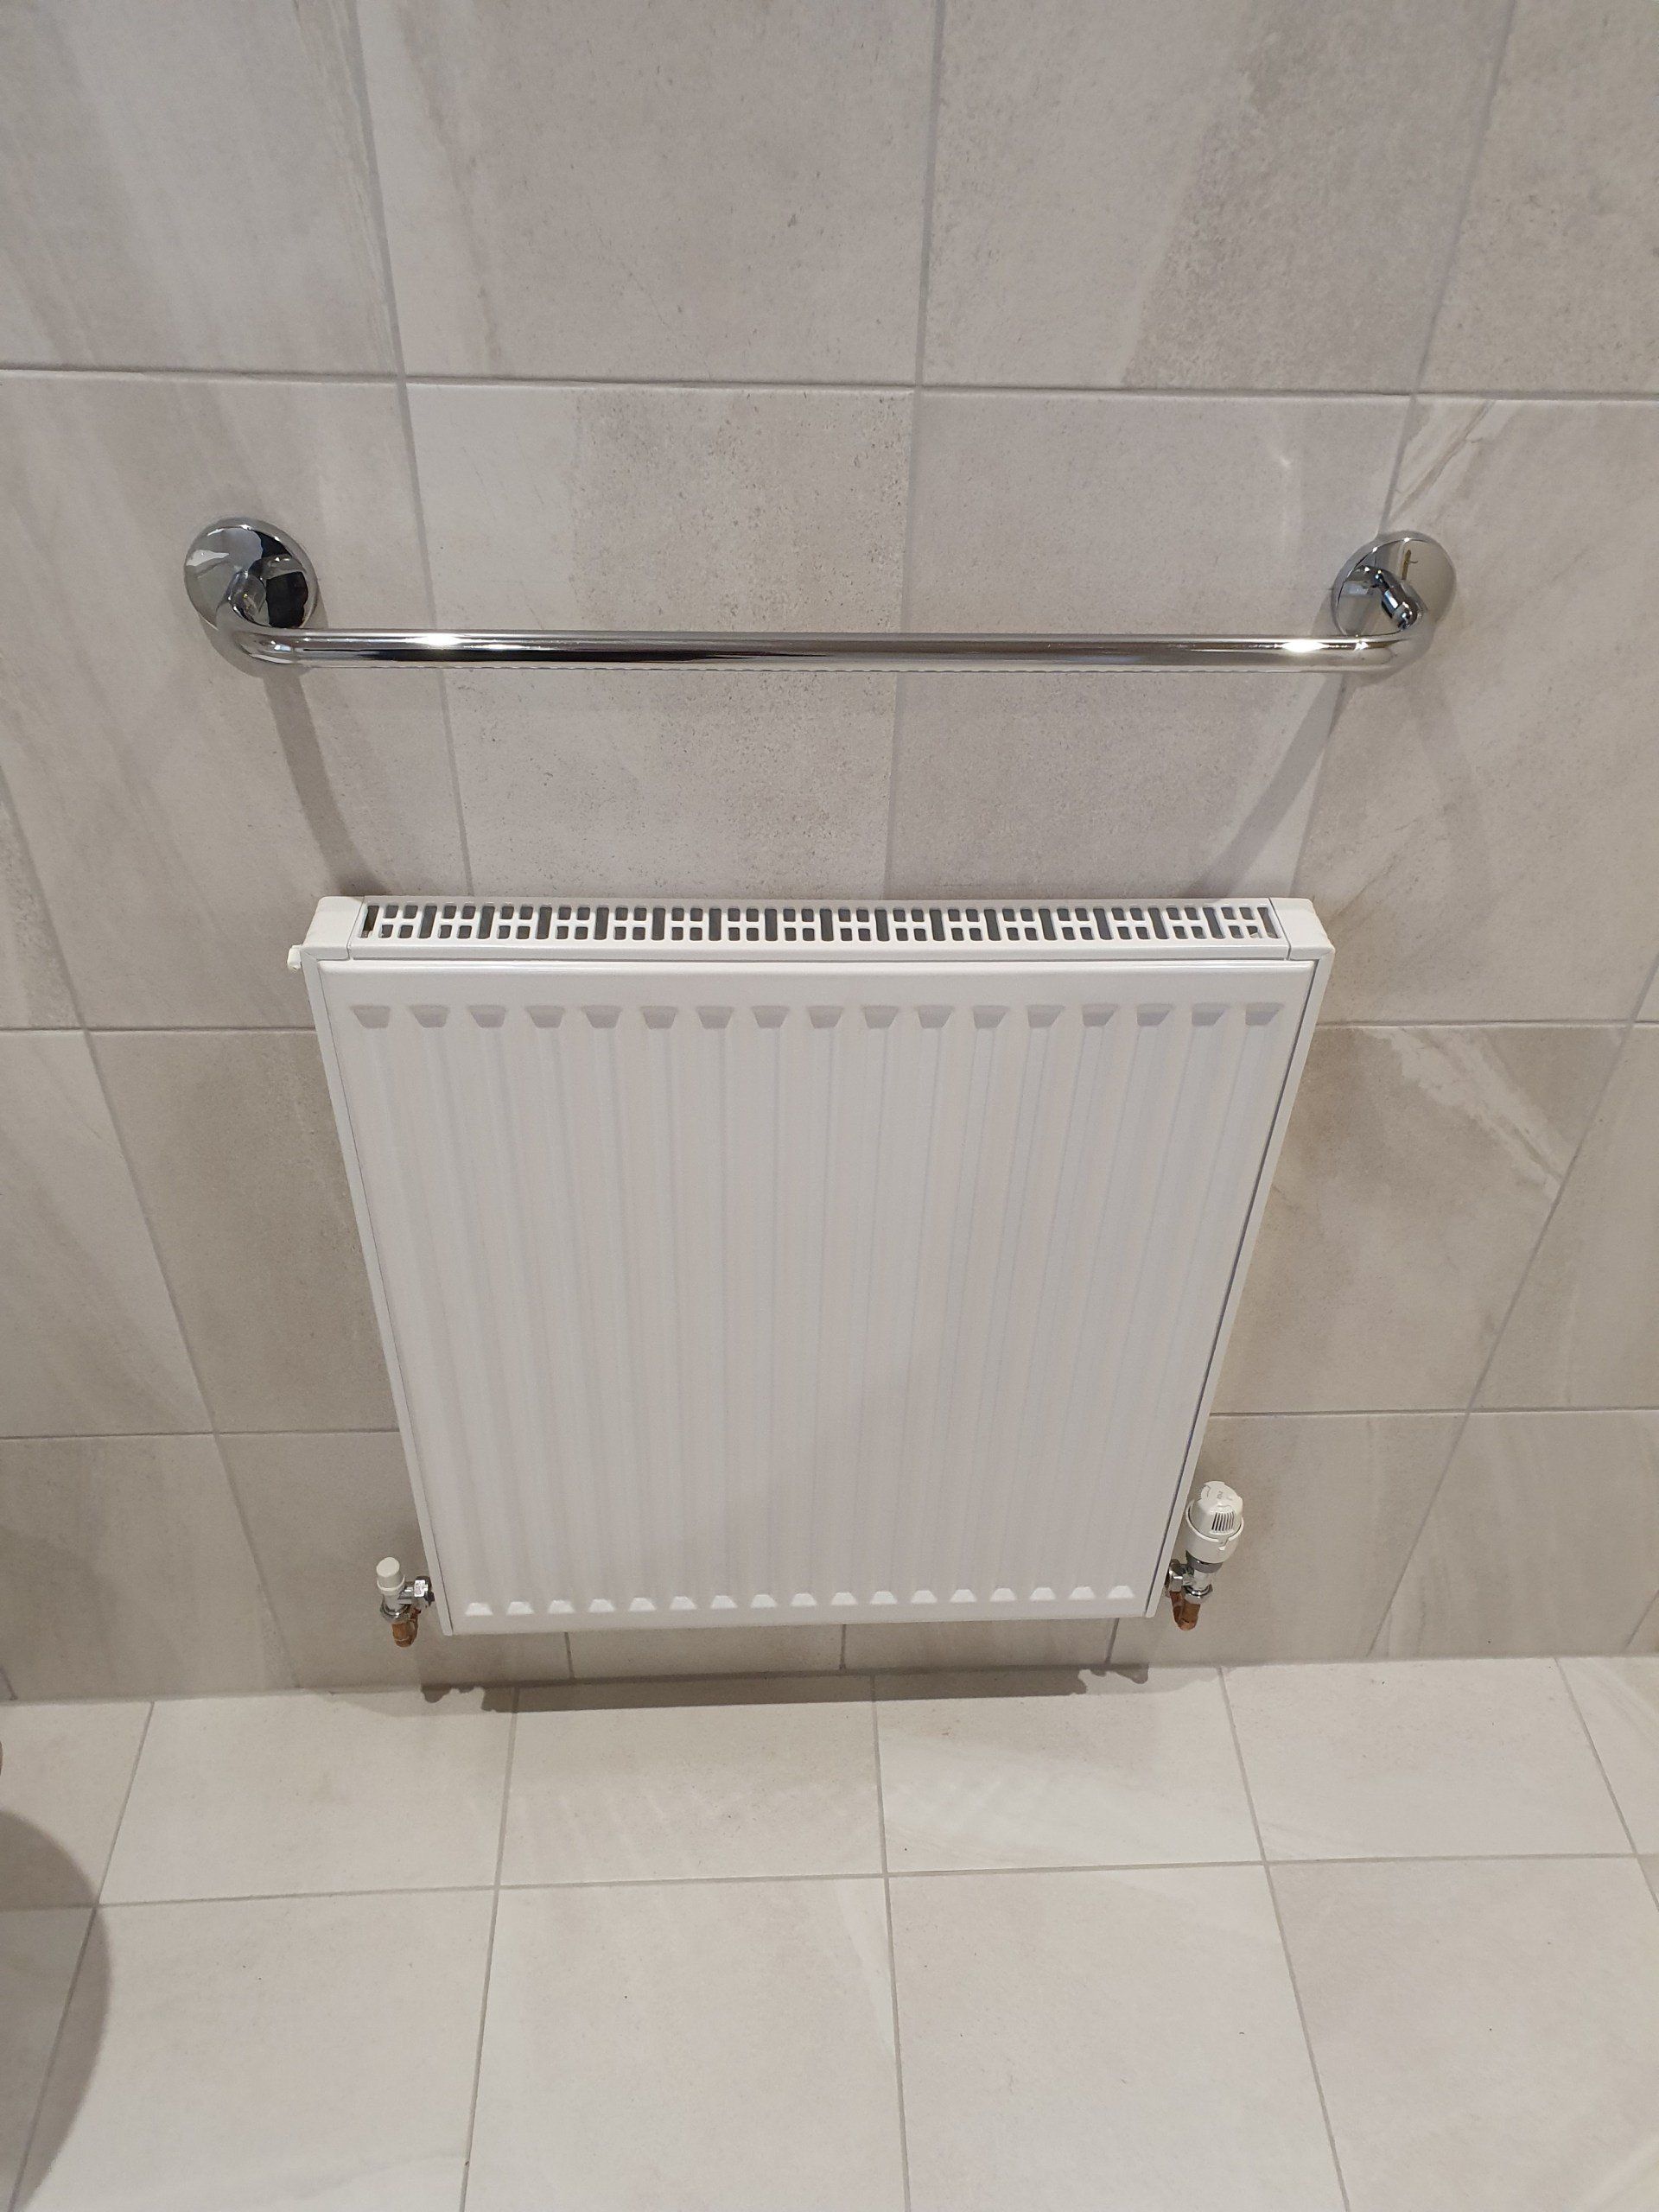 Below shows an installation of a main bathroom and matching en-suite. The use of tiles in both bathrooms create a light airy feel to both rooms.   In the en-suite the shower enclosure got brought up to date in this installation with a chrome enclosure and modern shower.